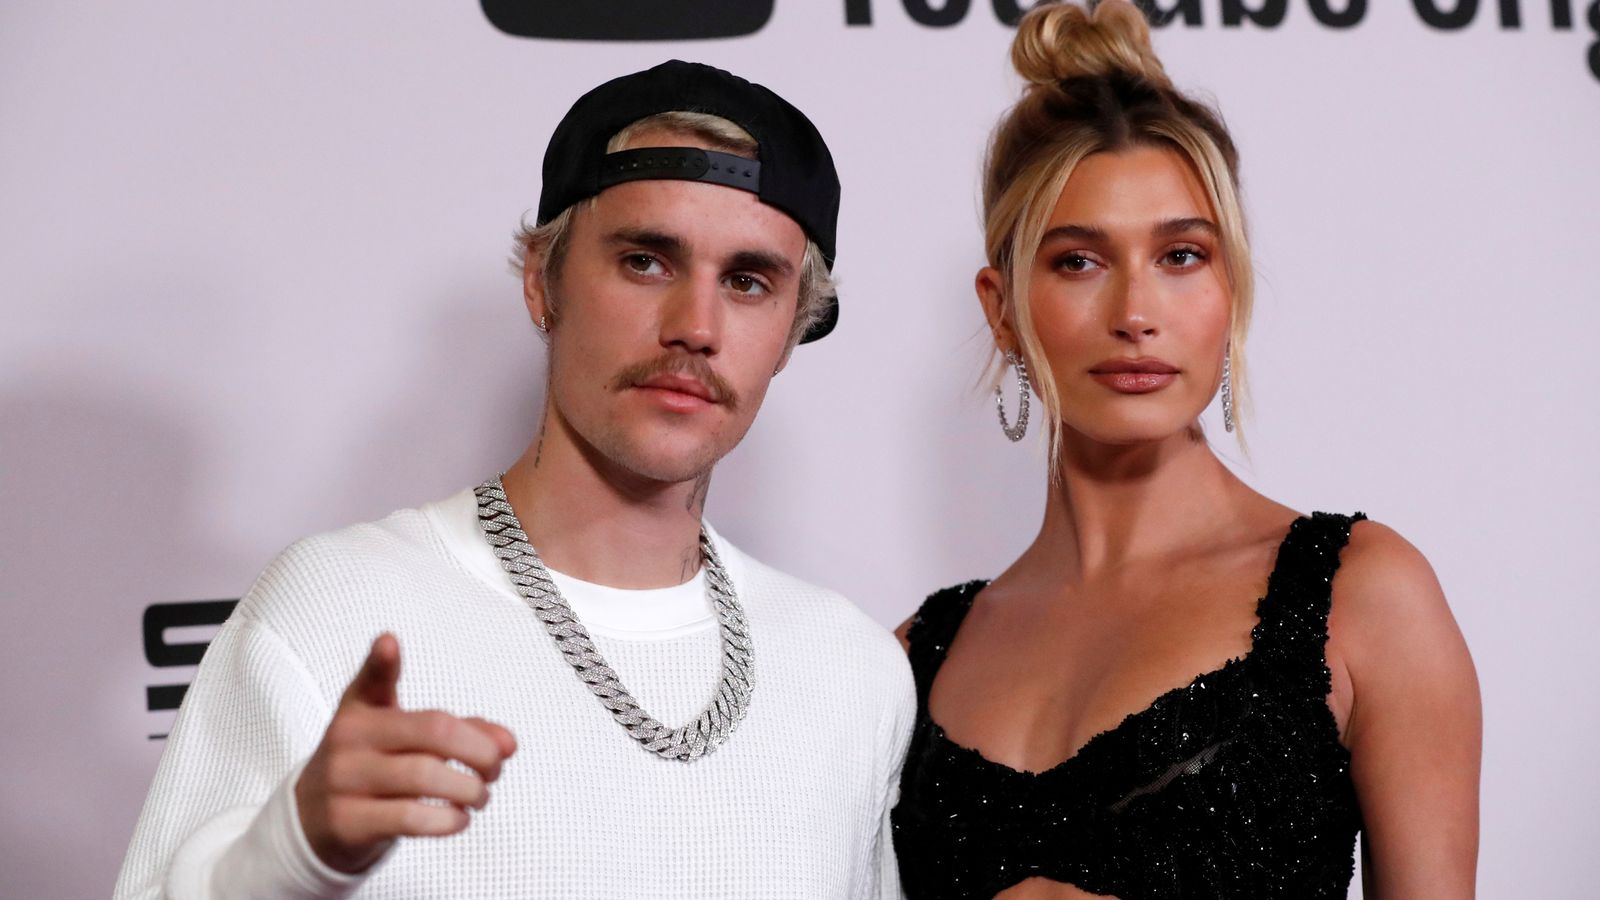 Hailey Bieber pregnant: Pop star Justin and wife announce they are expecting first child